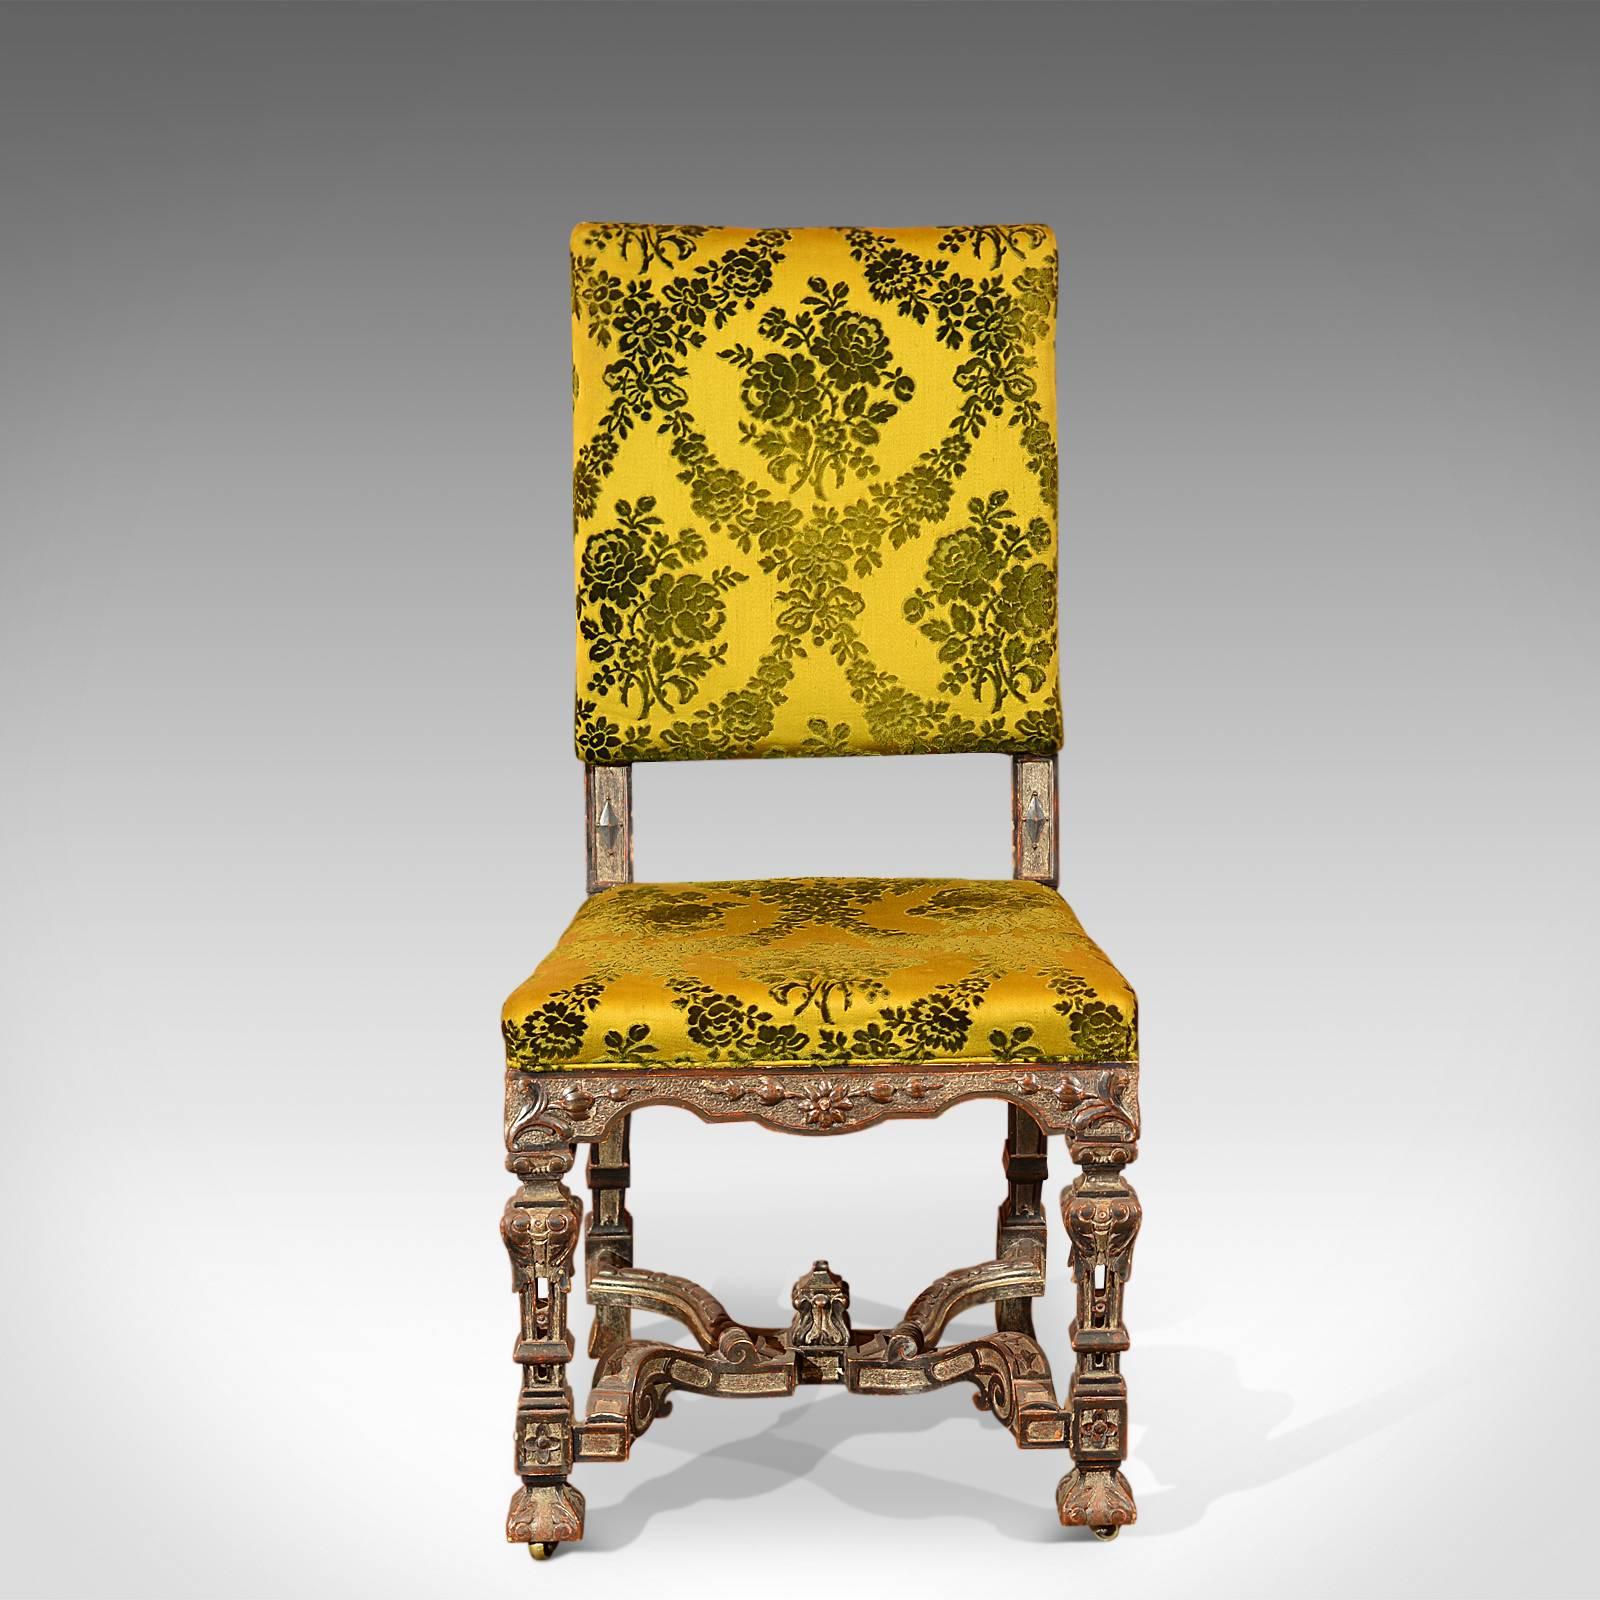 Gothic Revival Antique Side Chair, French, 19th Century